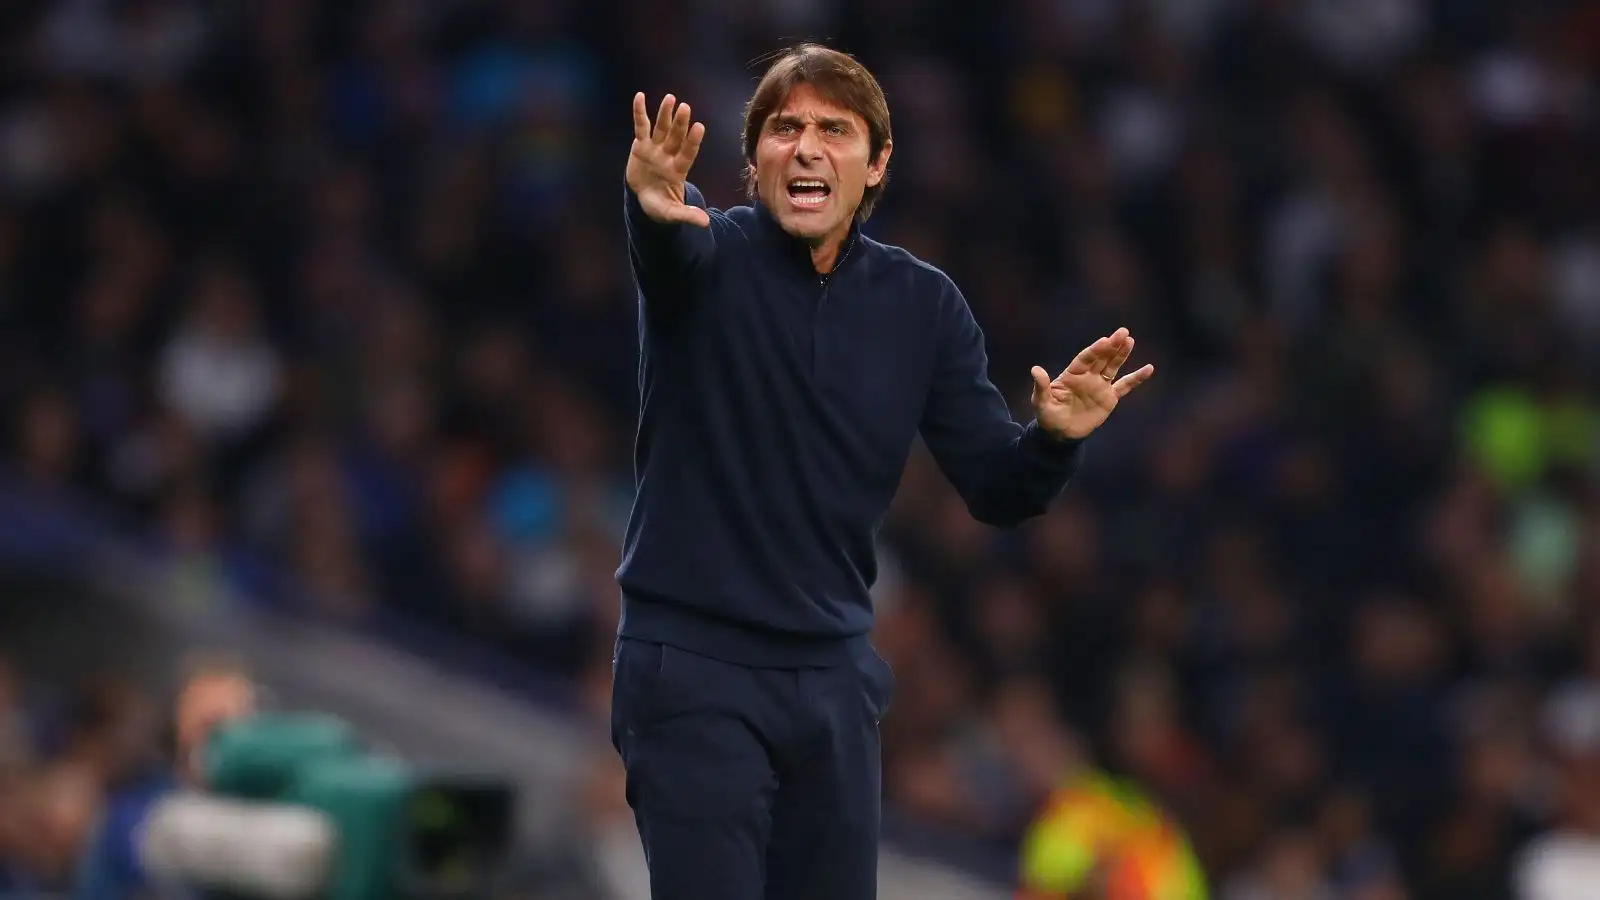 Tottenham players ‘annoyed’ as Conte tells them ‘they are not good enough’, claims ex-Spurs star